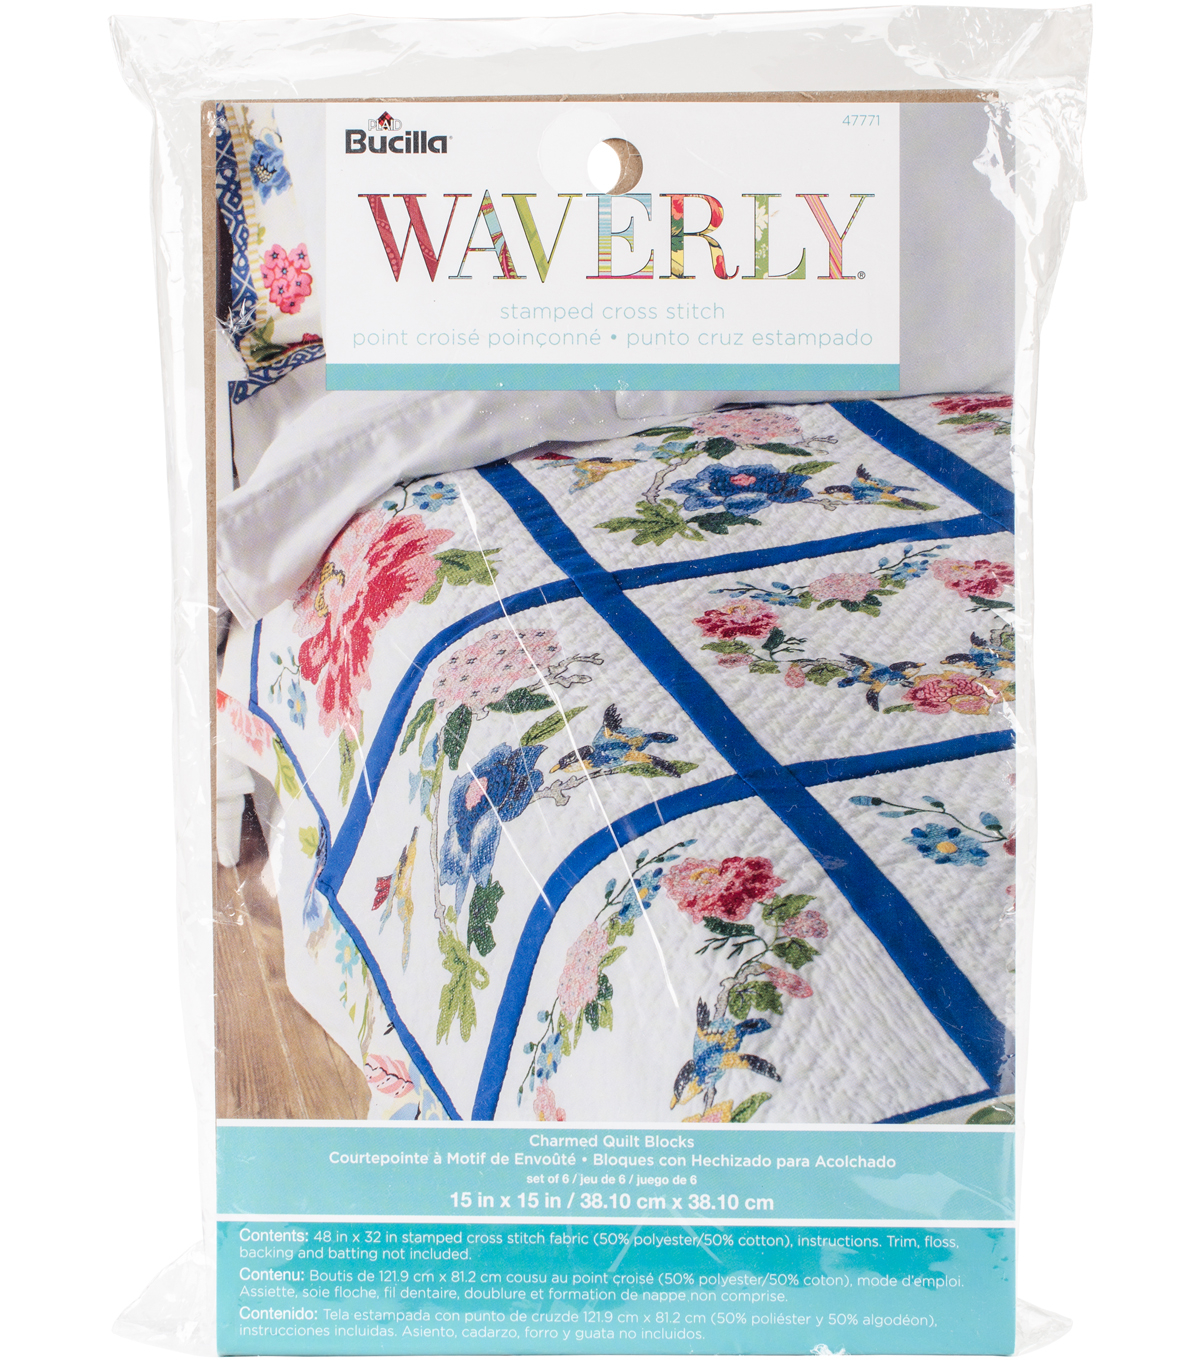 Embroidery Quilt Patterns Stamped Embroidery Quilt Blocks 15x15 6 Pack Waverly Charmed